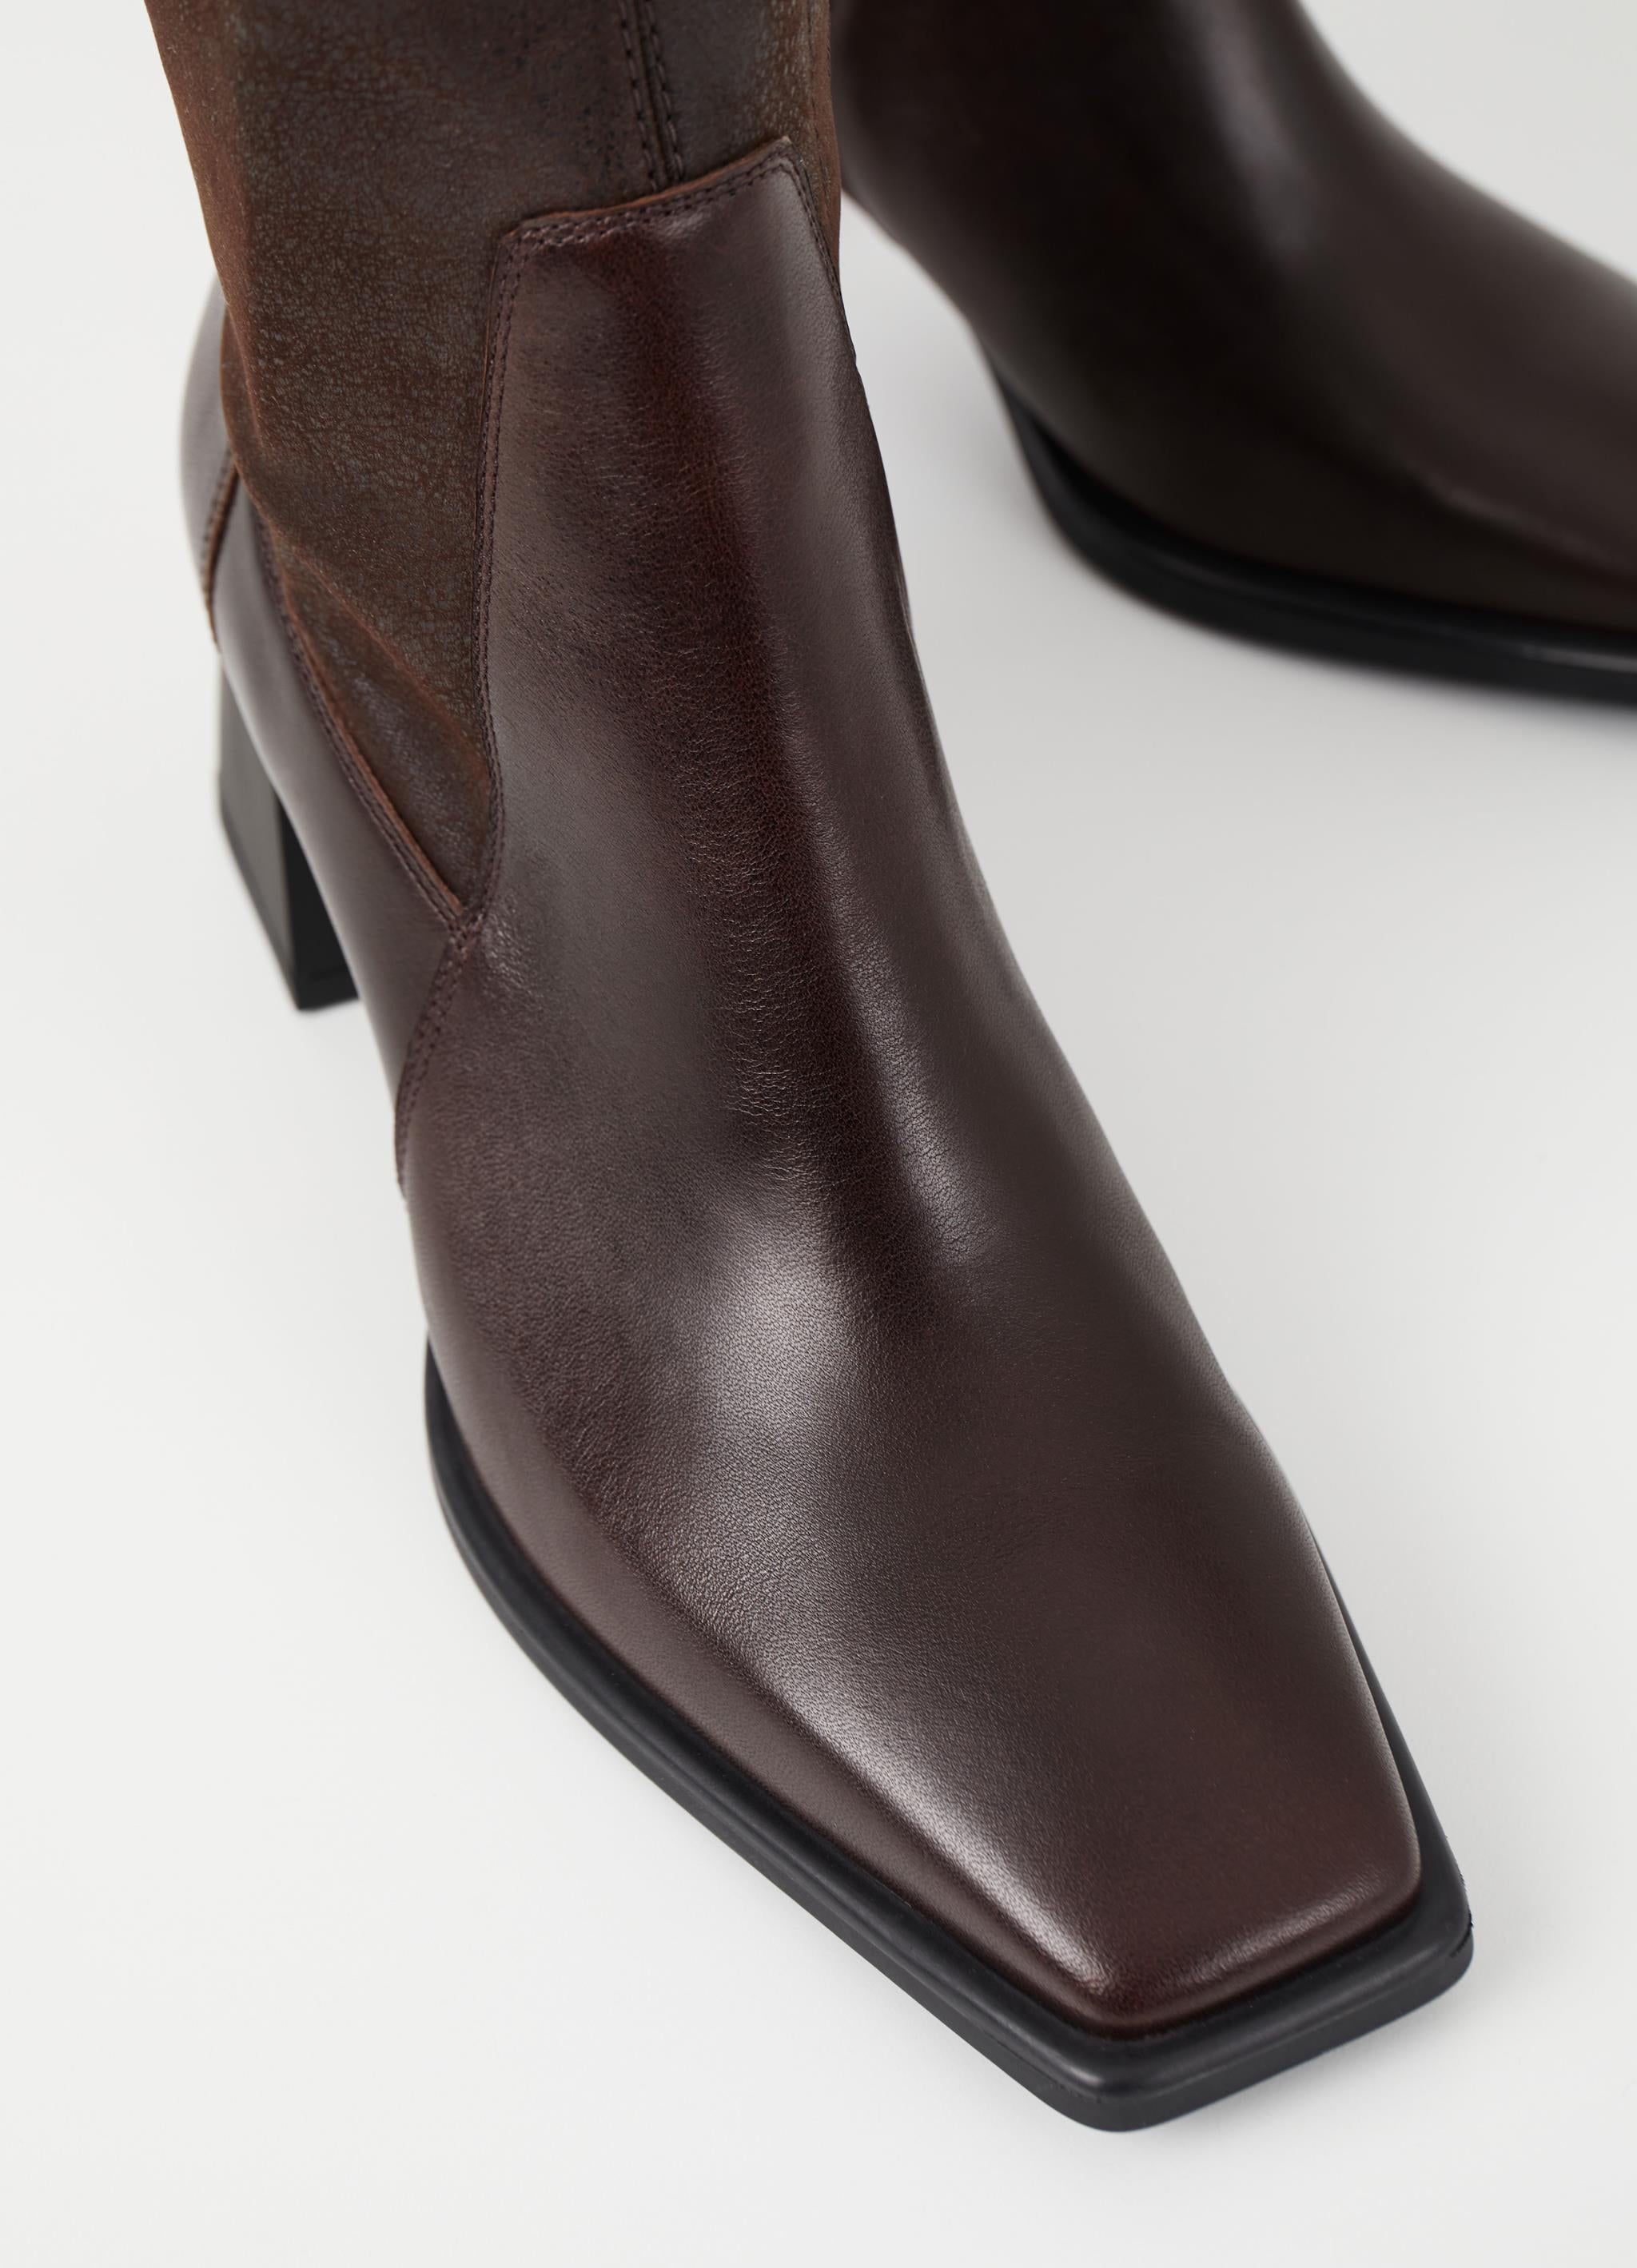 Mid-length inside zip brown leather boot with flared block rubber heel and rounded square toe